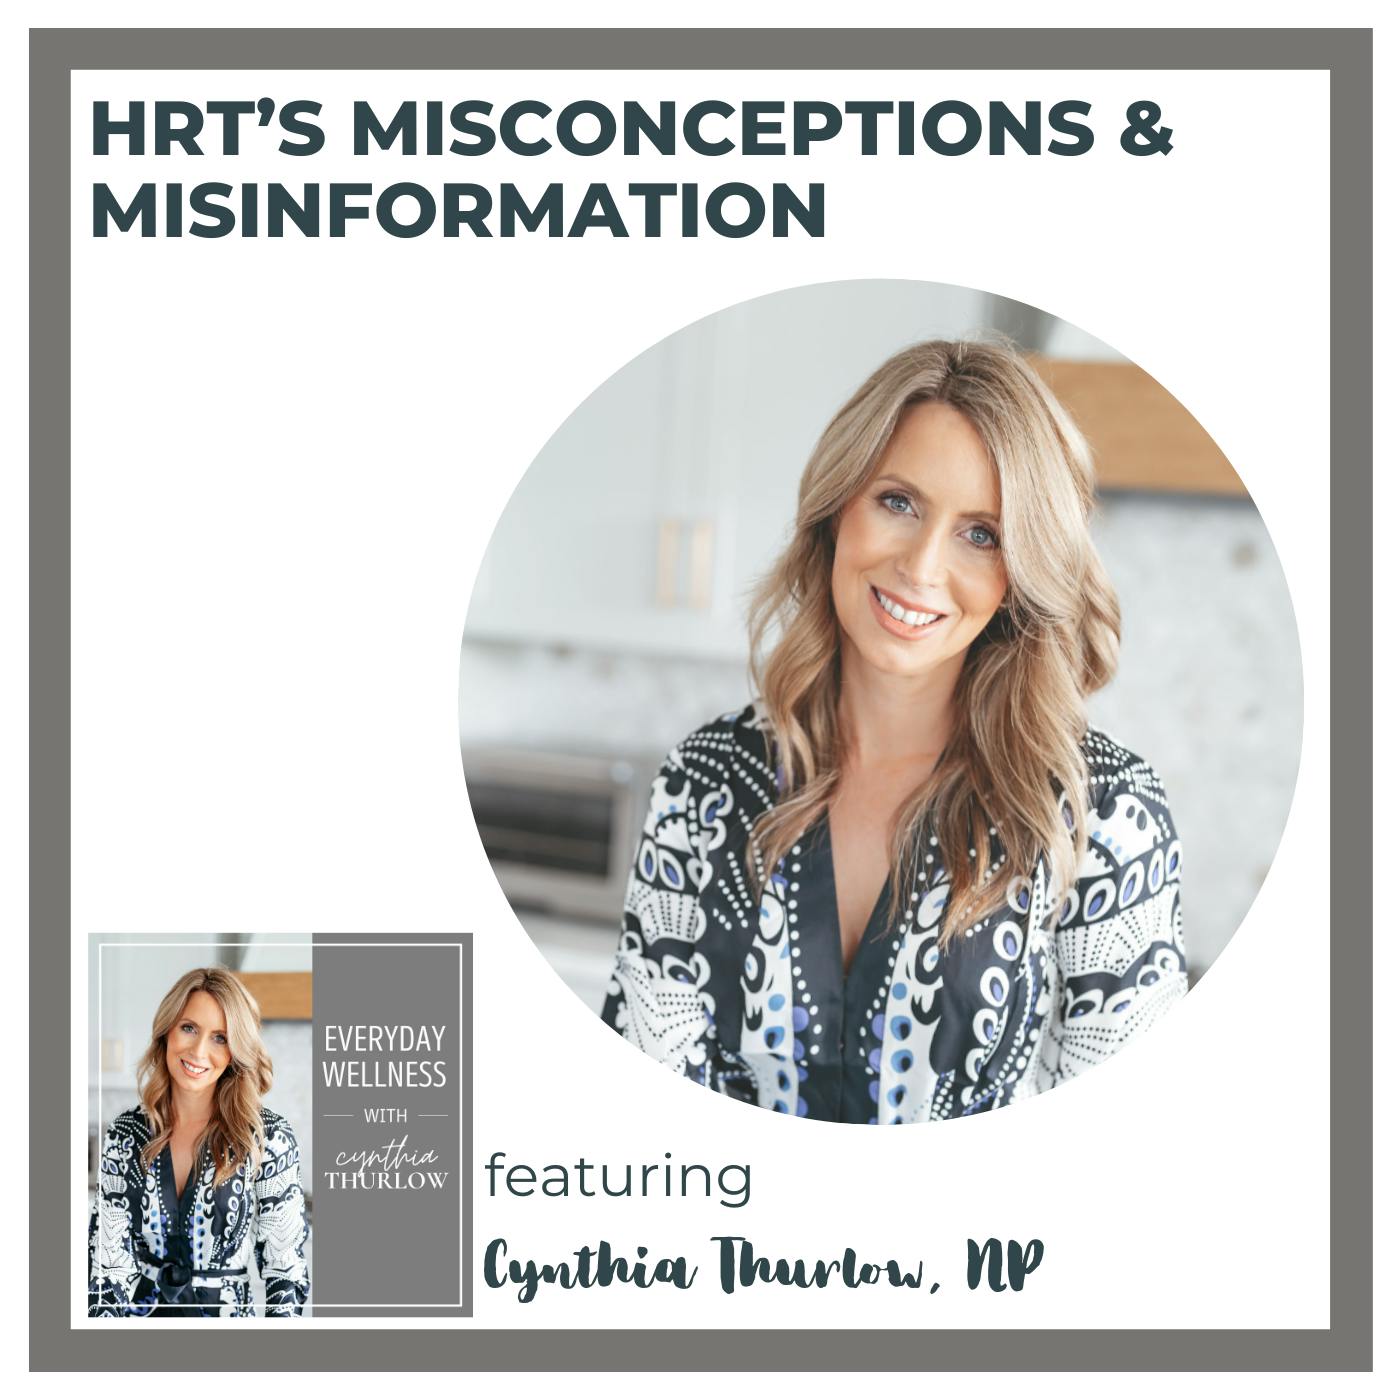 Ep. 284 AMA #1: HRT’s Misconceptions & Misinformation with Cynthia Thurlow, NP